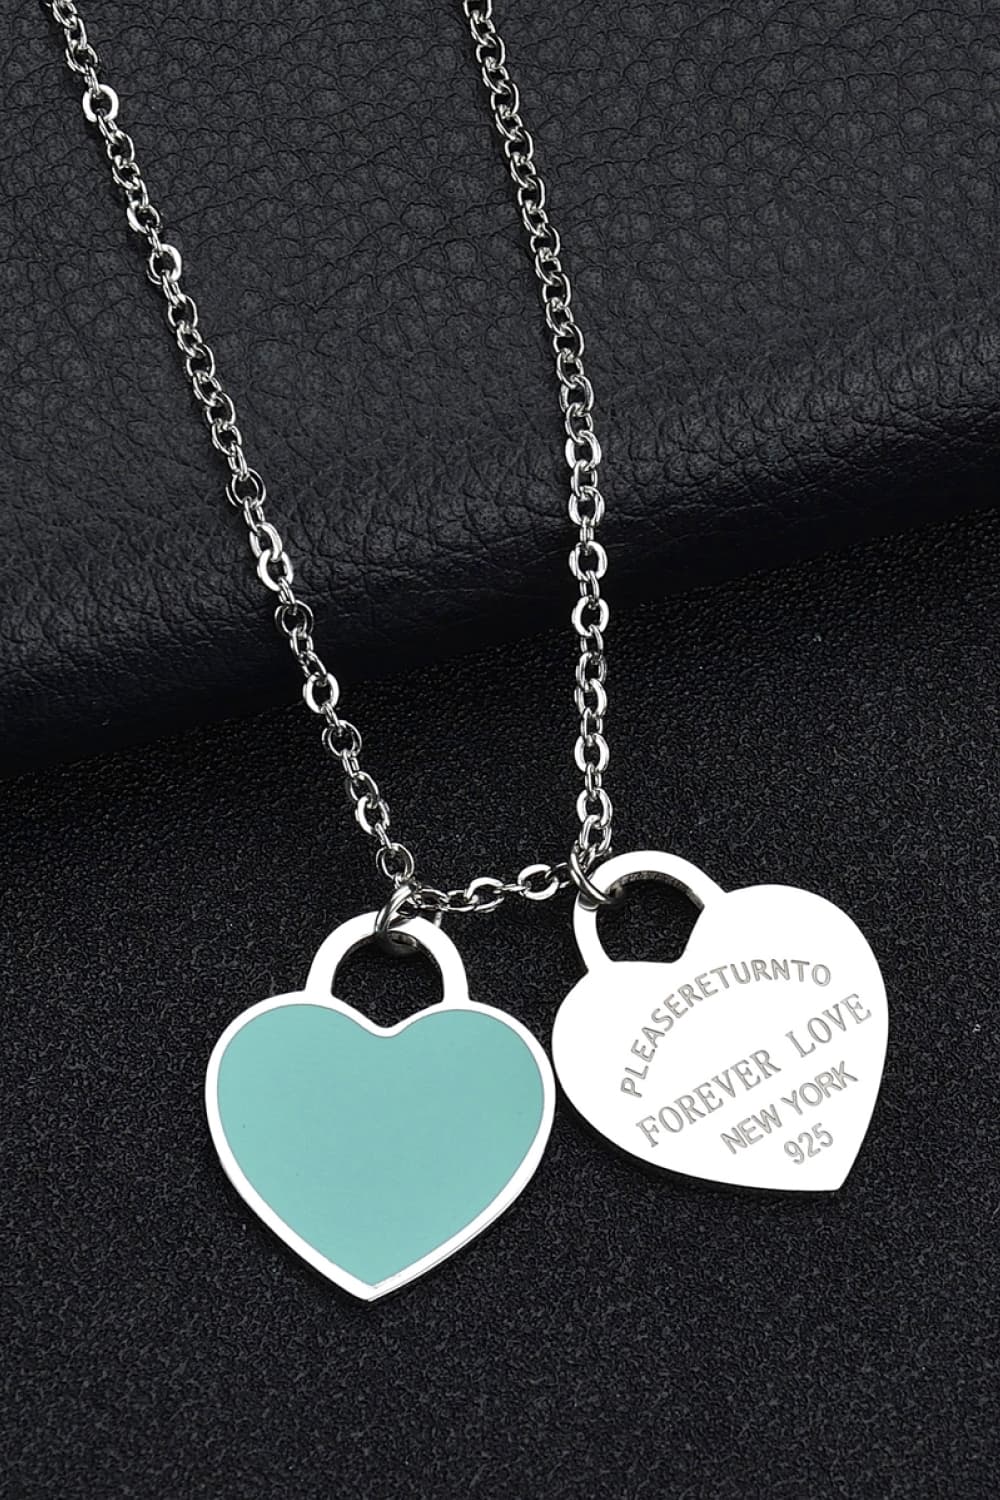 Please Return To Heart Pendant Stainless Steel Necklace